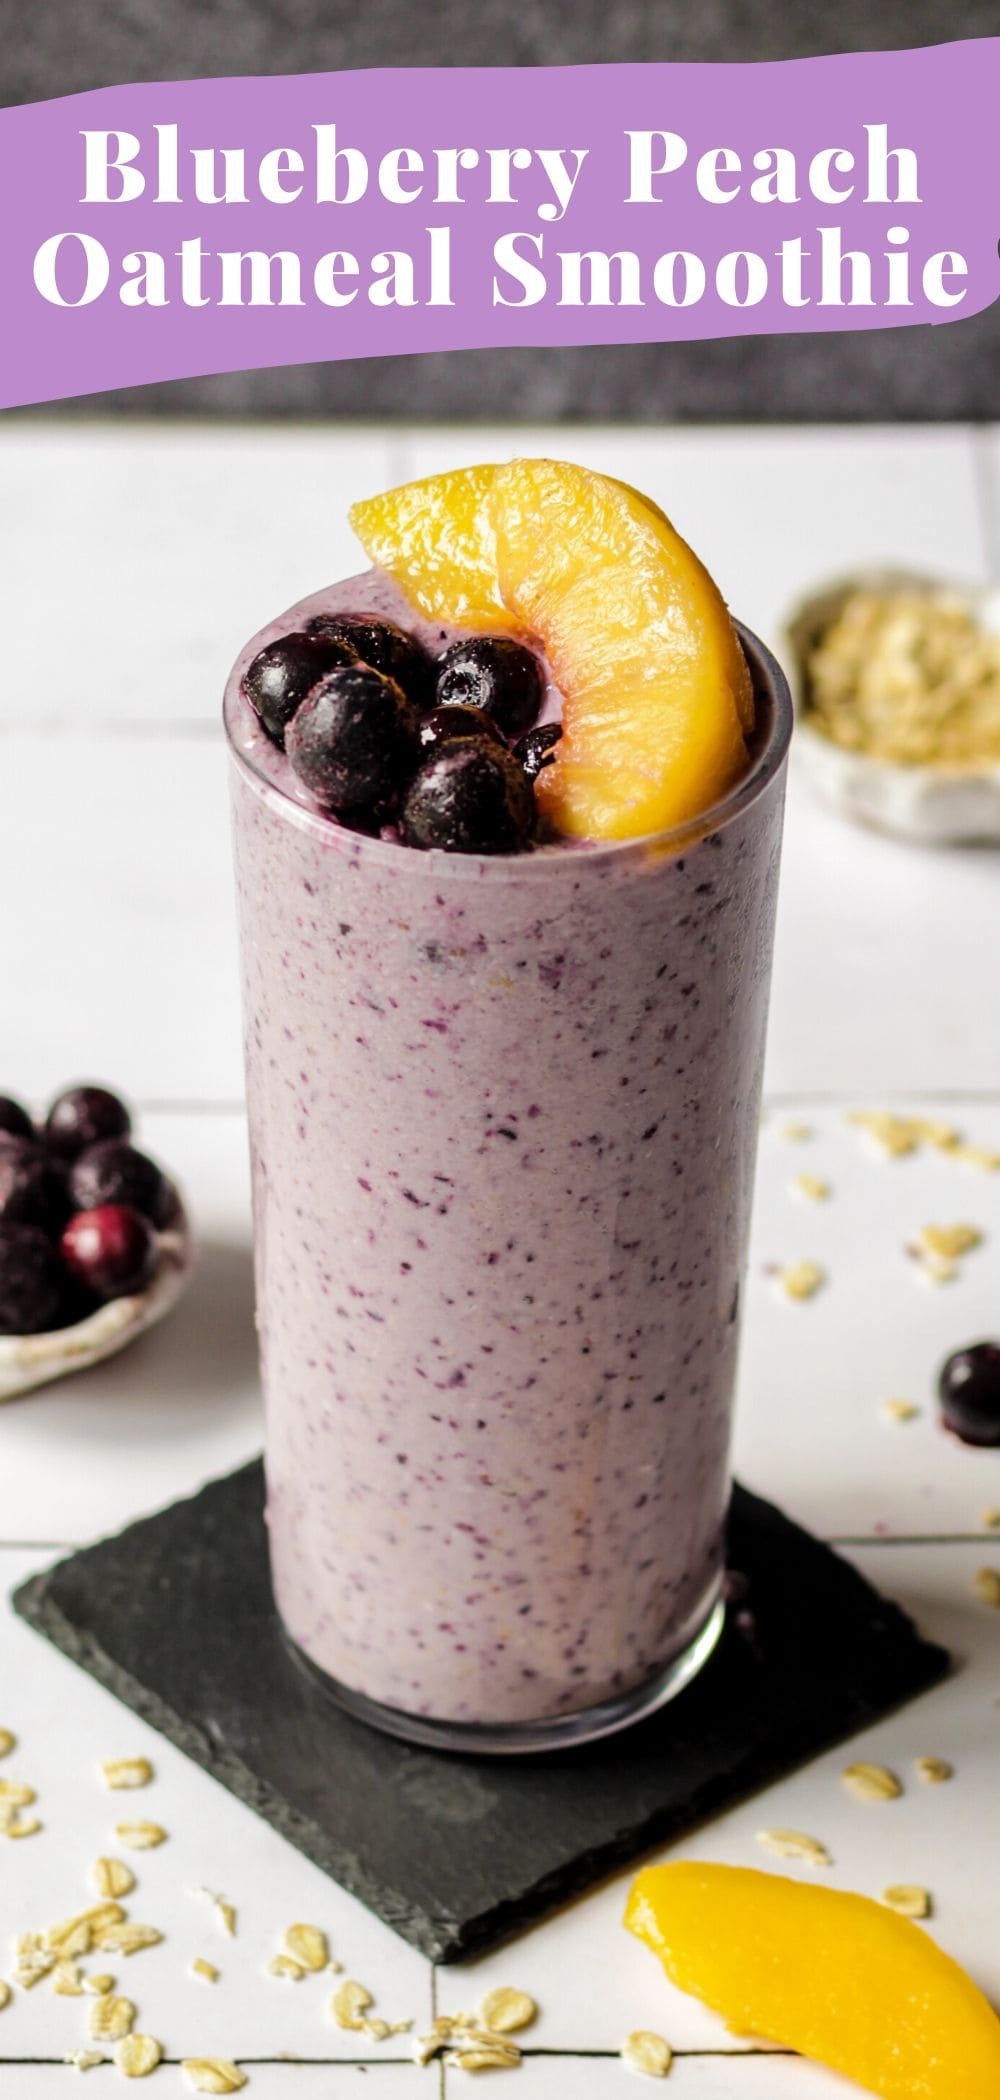 Try this easy and vibrant Blueberry Peach smoothie recipe with lemon zest added for a punch of flavor! #smoothies via @bessiebakes